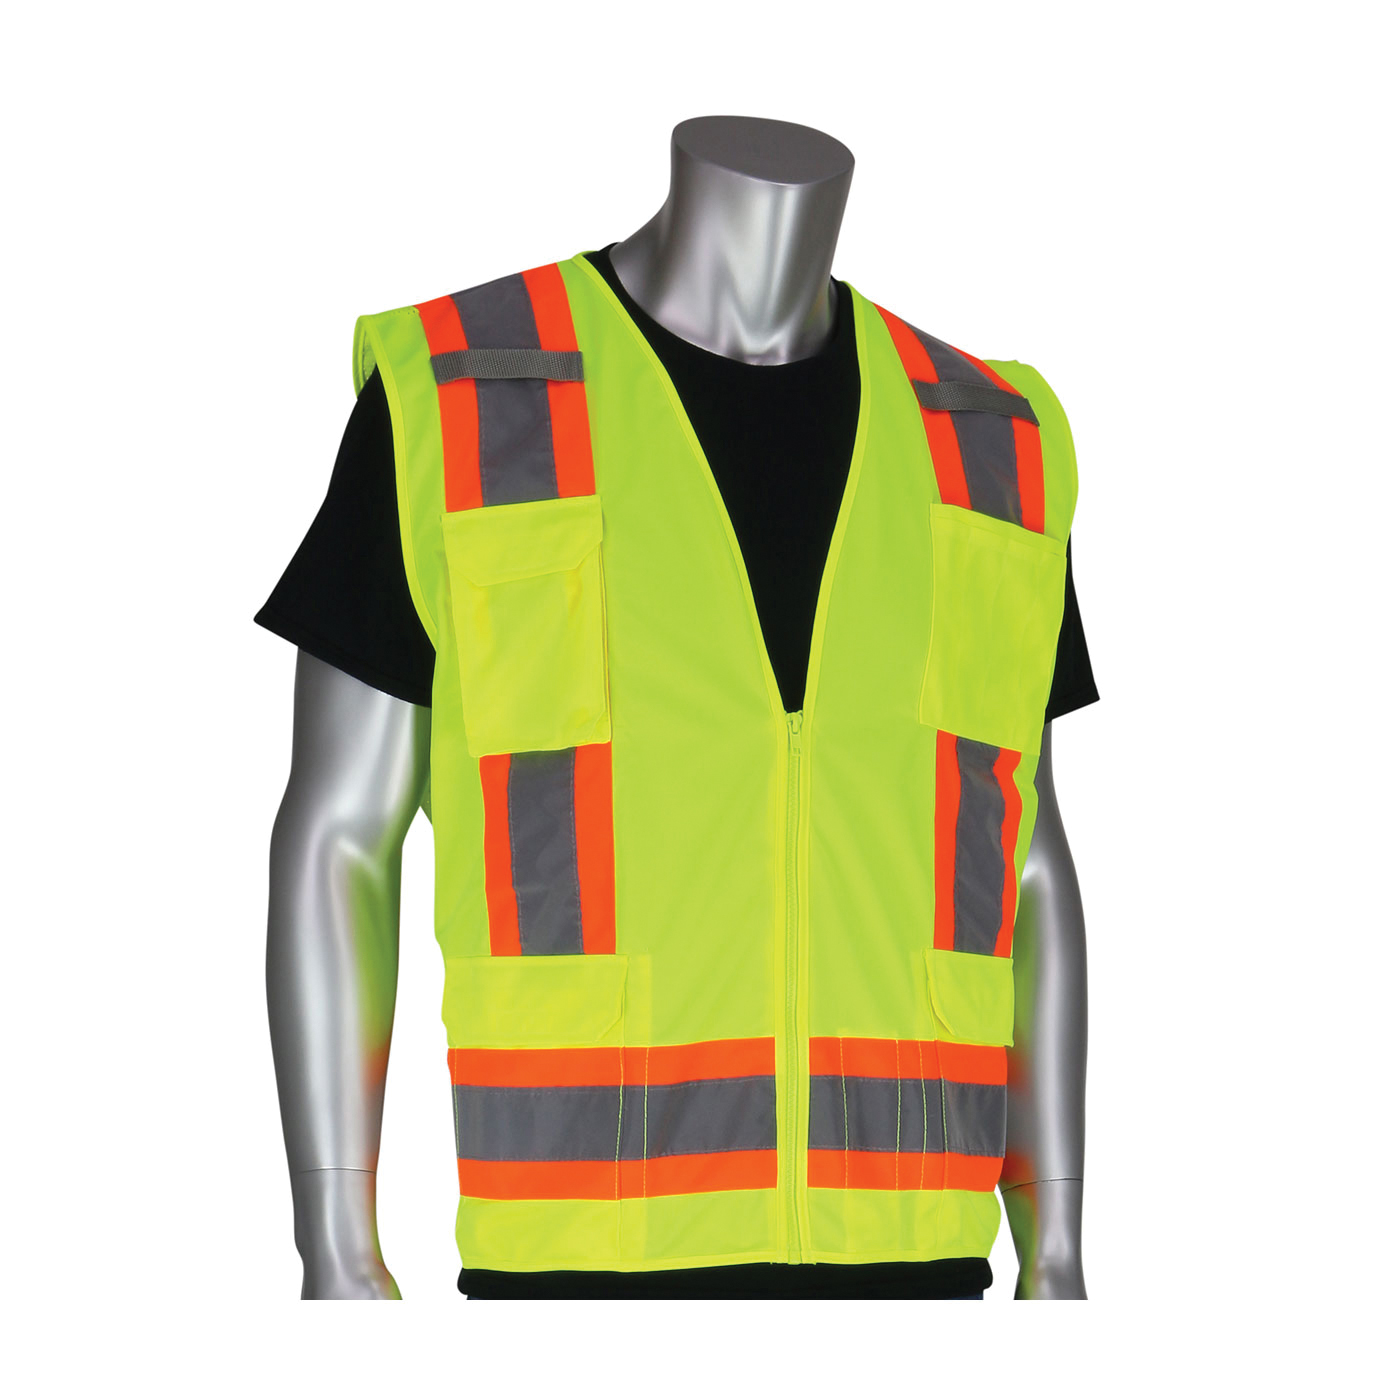 PIP® 302-0500S-YEL/XL 2-Tone Surveyor Safety Vest, XL, Hi-Viz Lime Yellow, Polyester/Solid Tricot, Zipper Closure, 11 Pockets, ANSI Class: Class 2, Specifications Met: ANSI 107 Type R